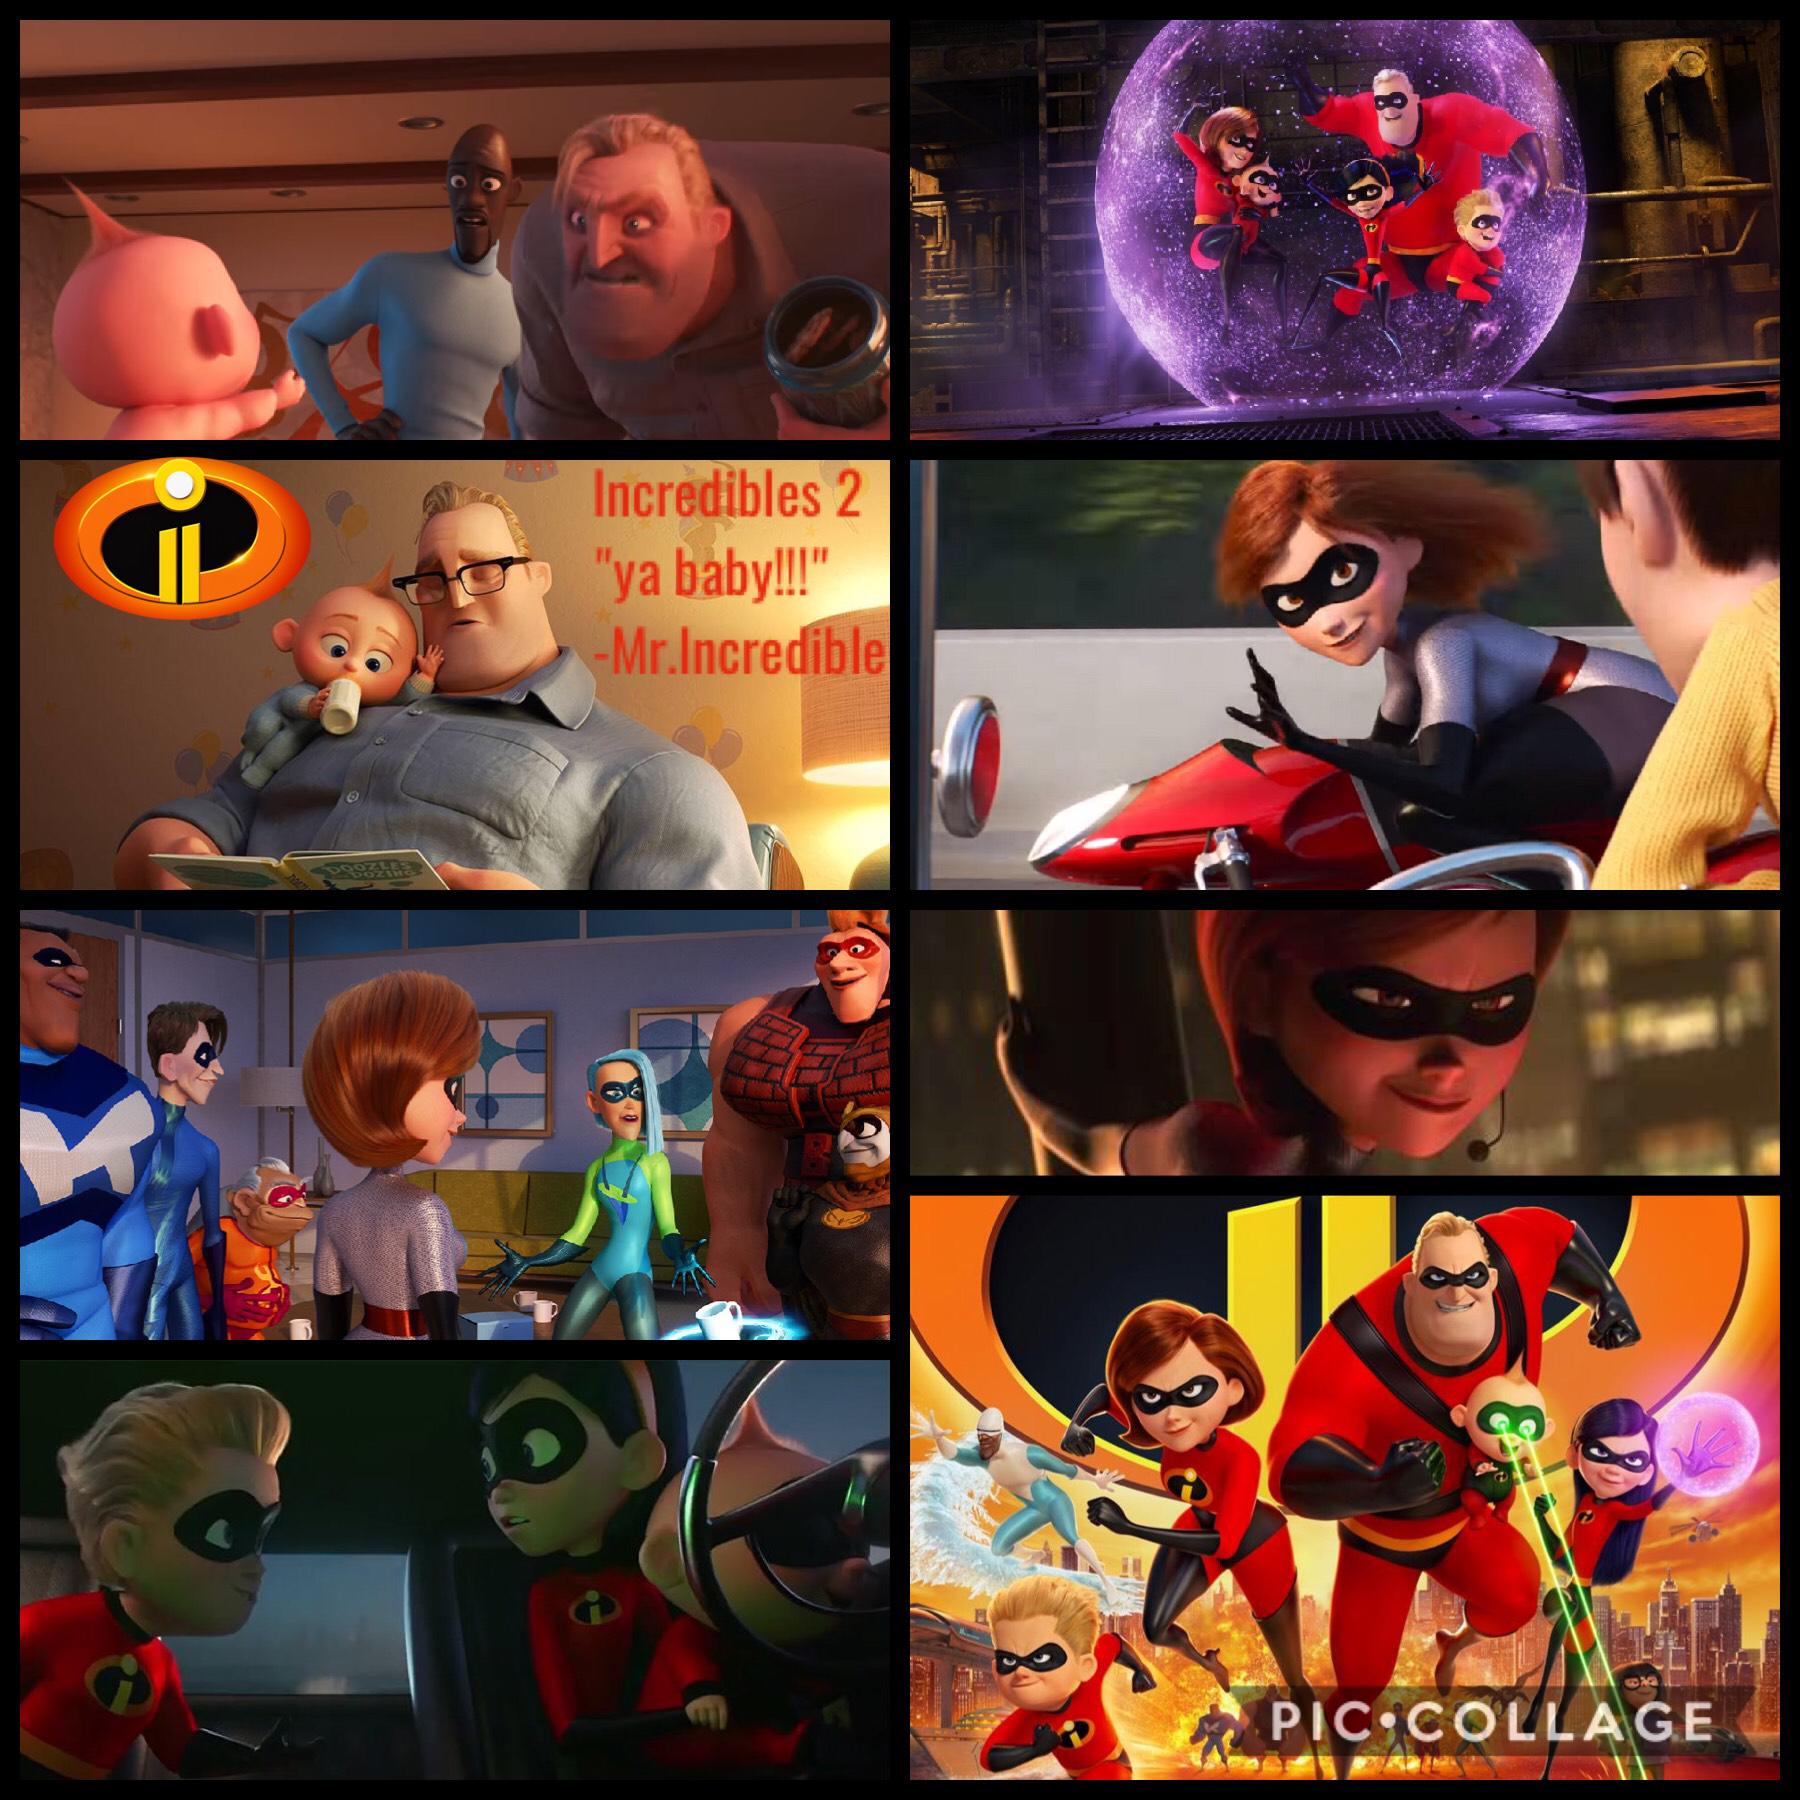 Incredibles 2 was amazing!!!!